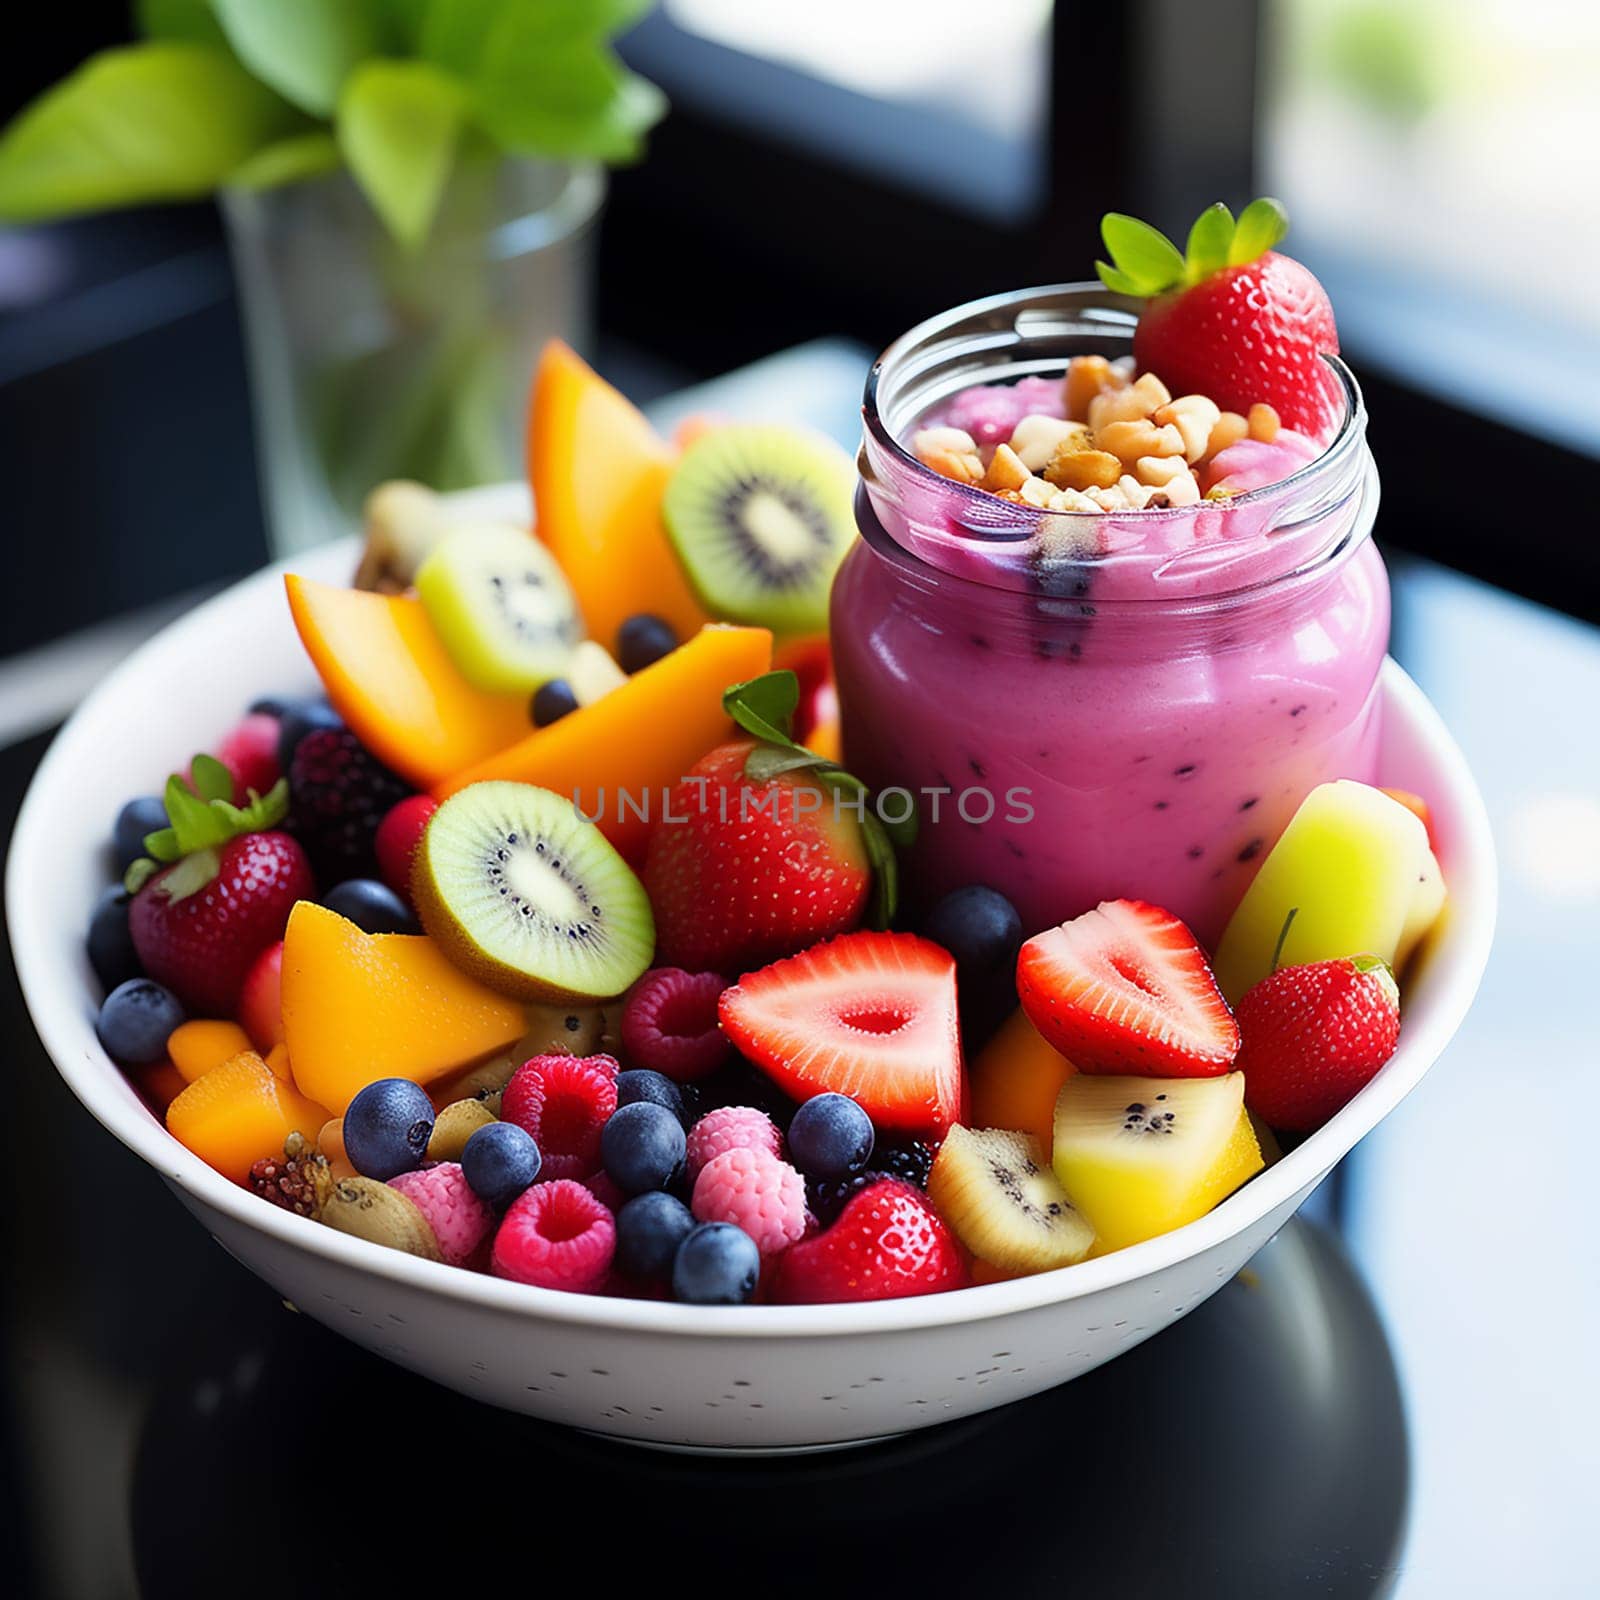 Fruitful Delights: Exploring Salad and Smoothie Creations by Petrichor